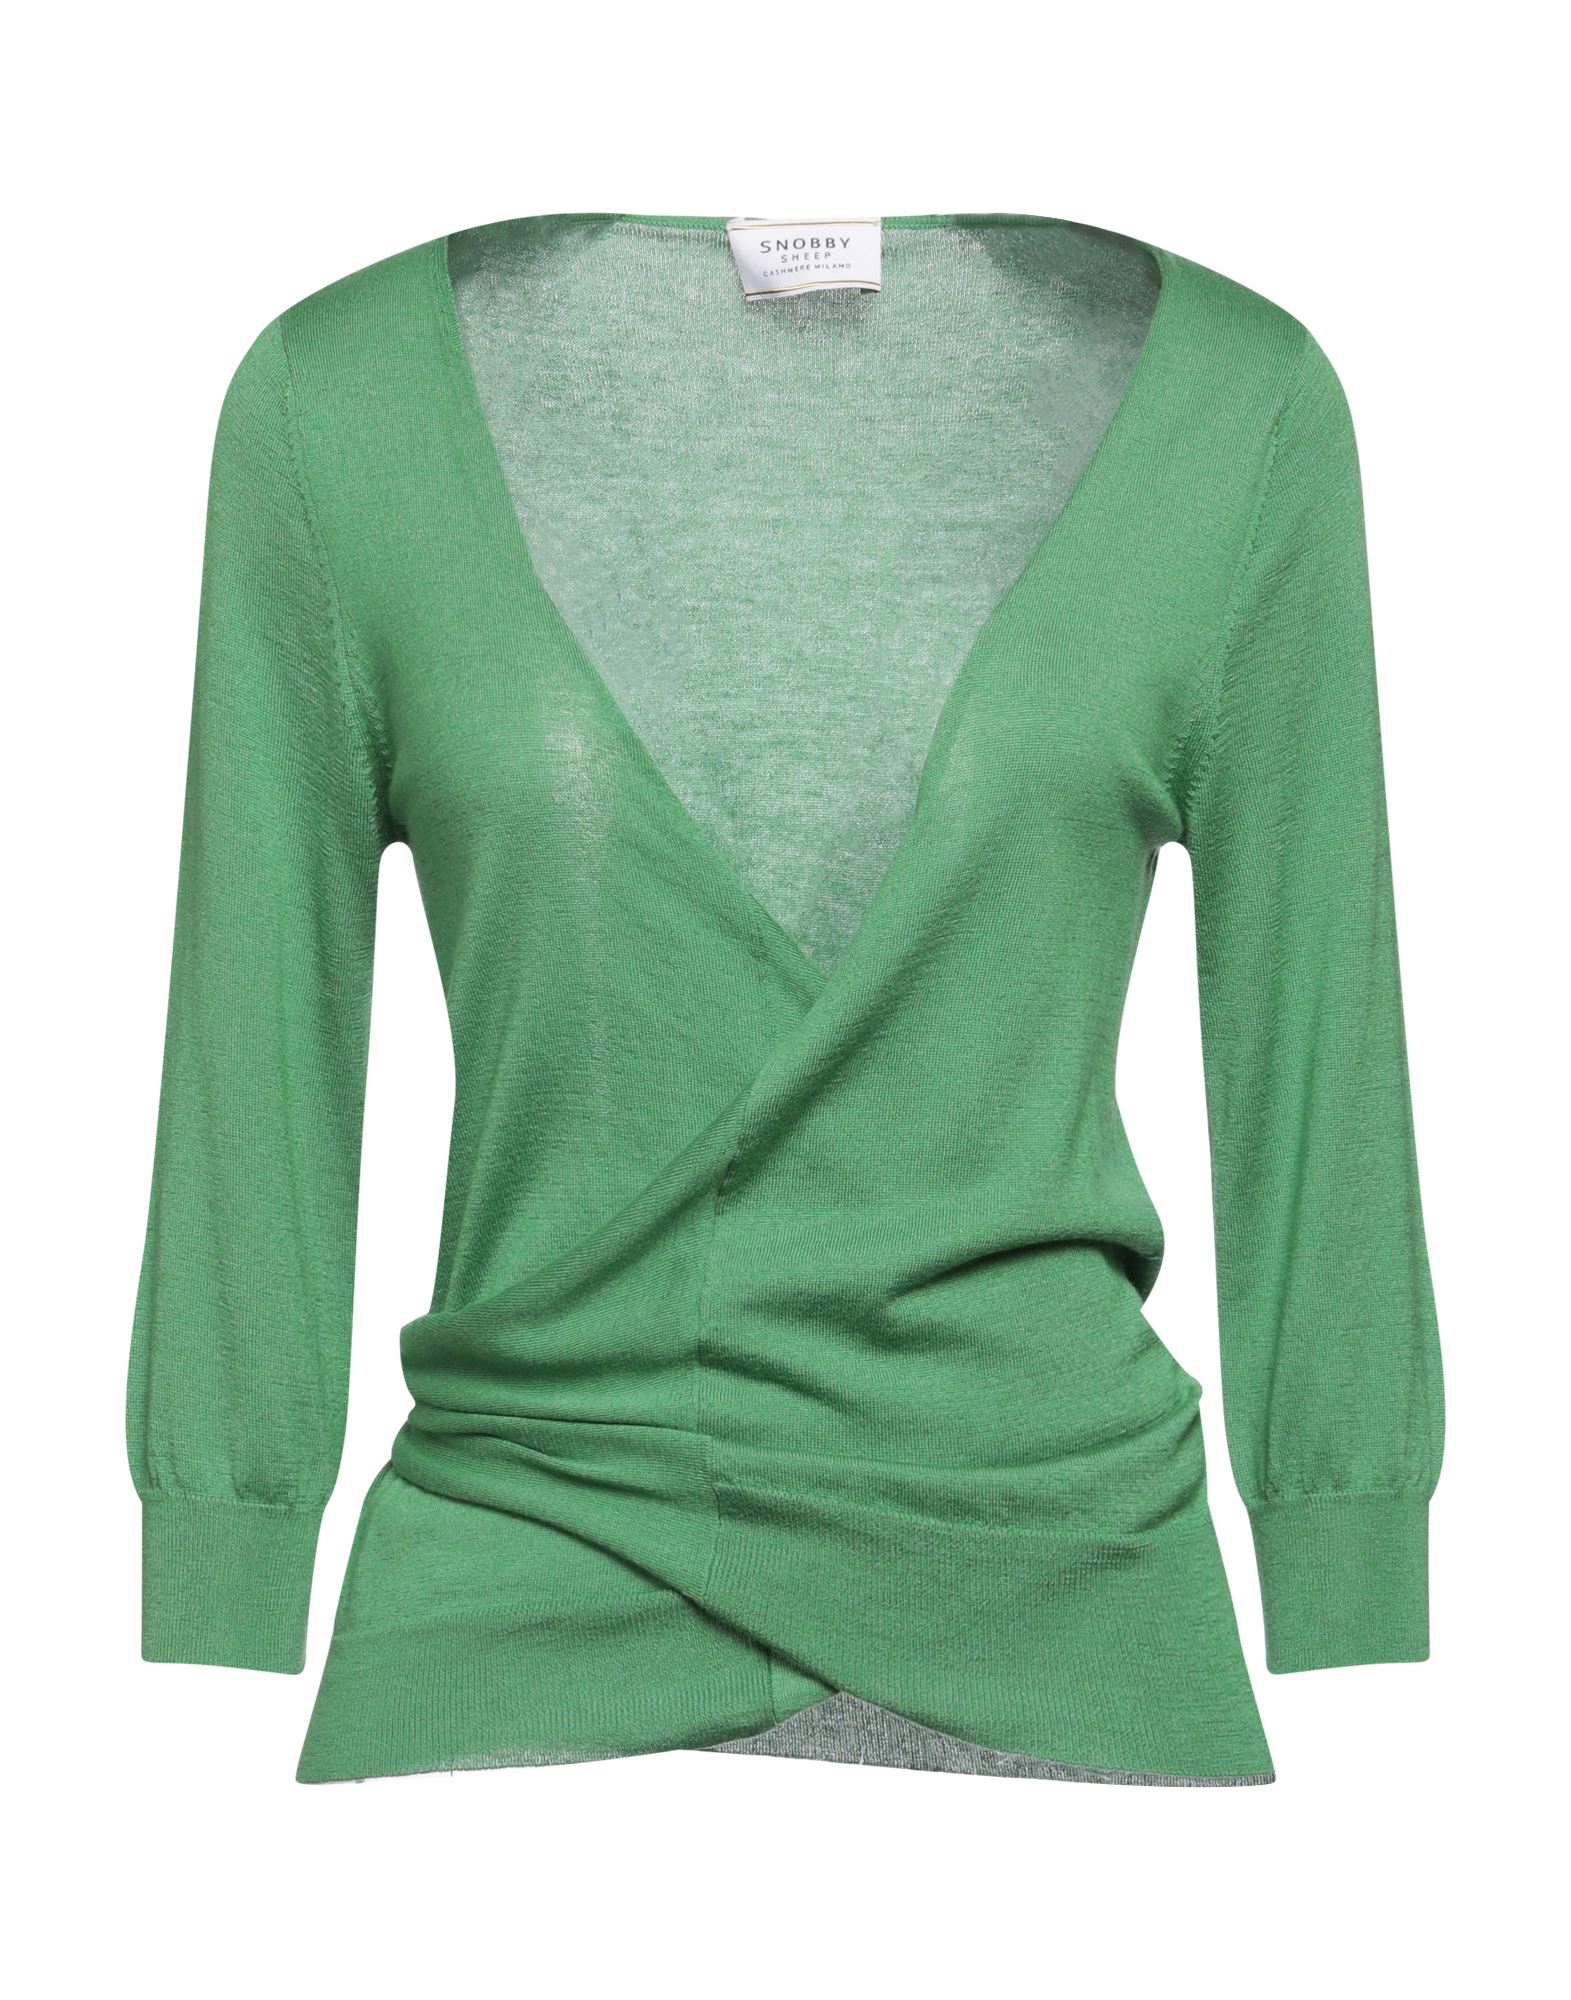 Snobby Sheep Wrap Cardigans In Green